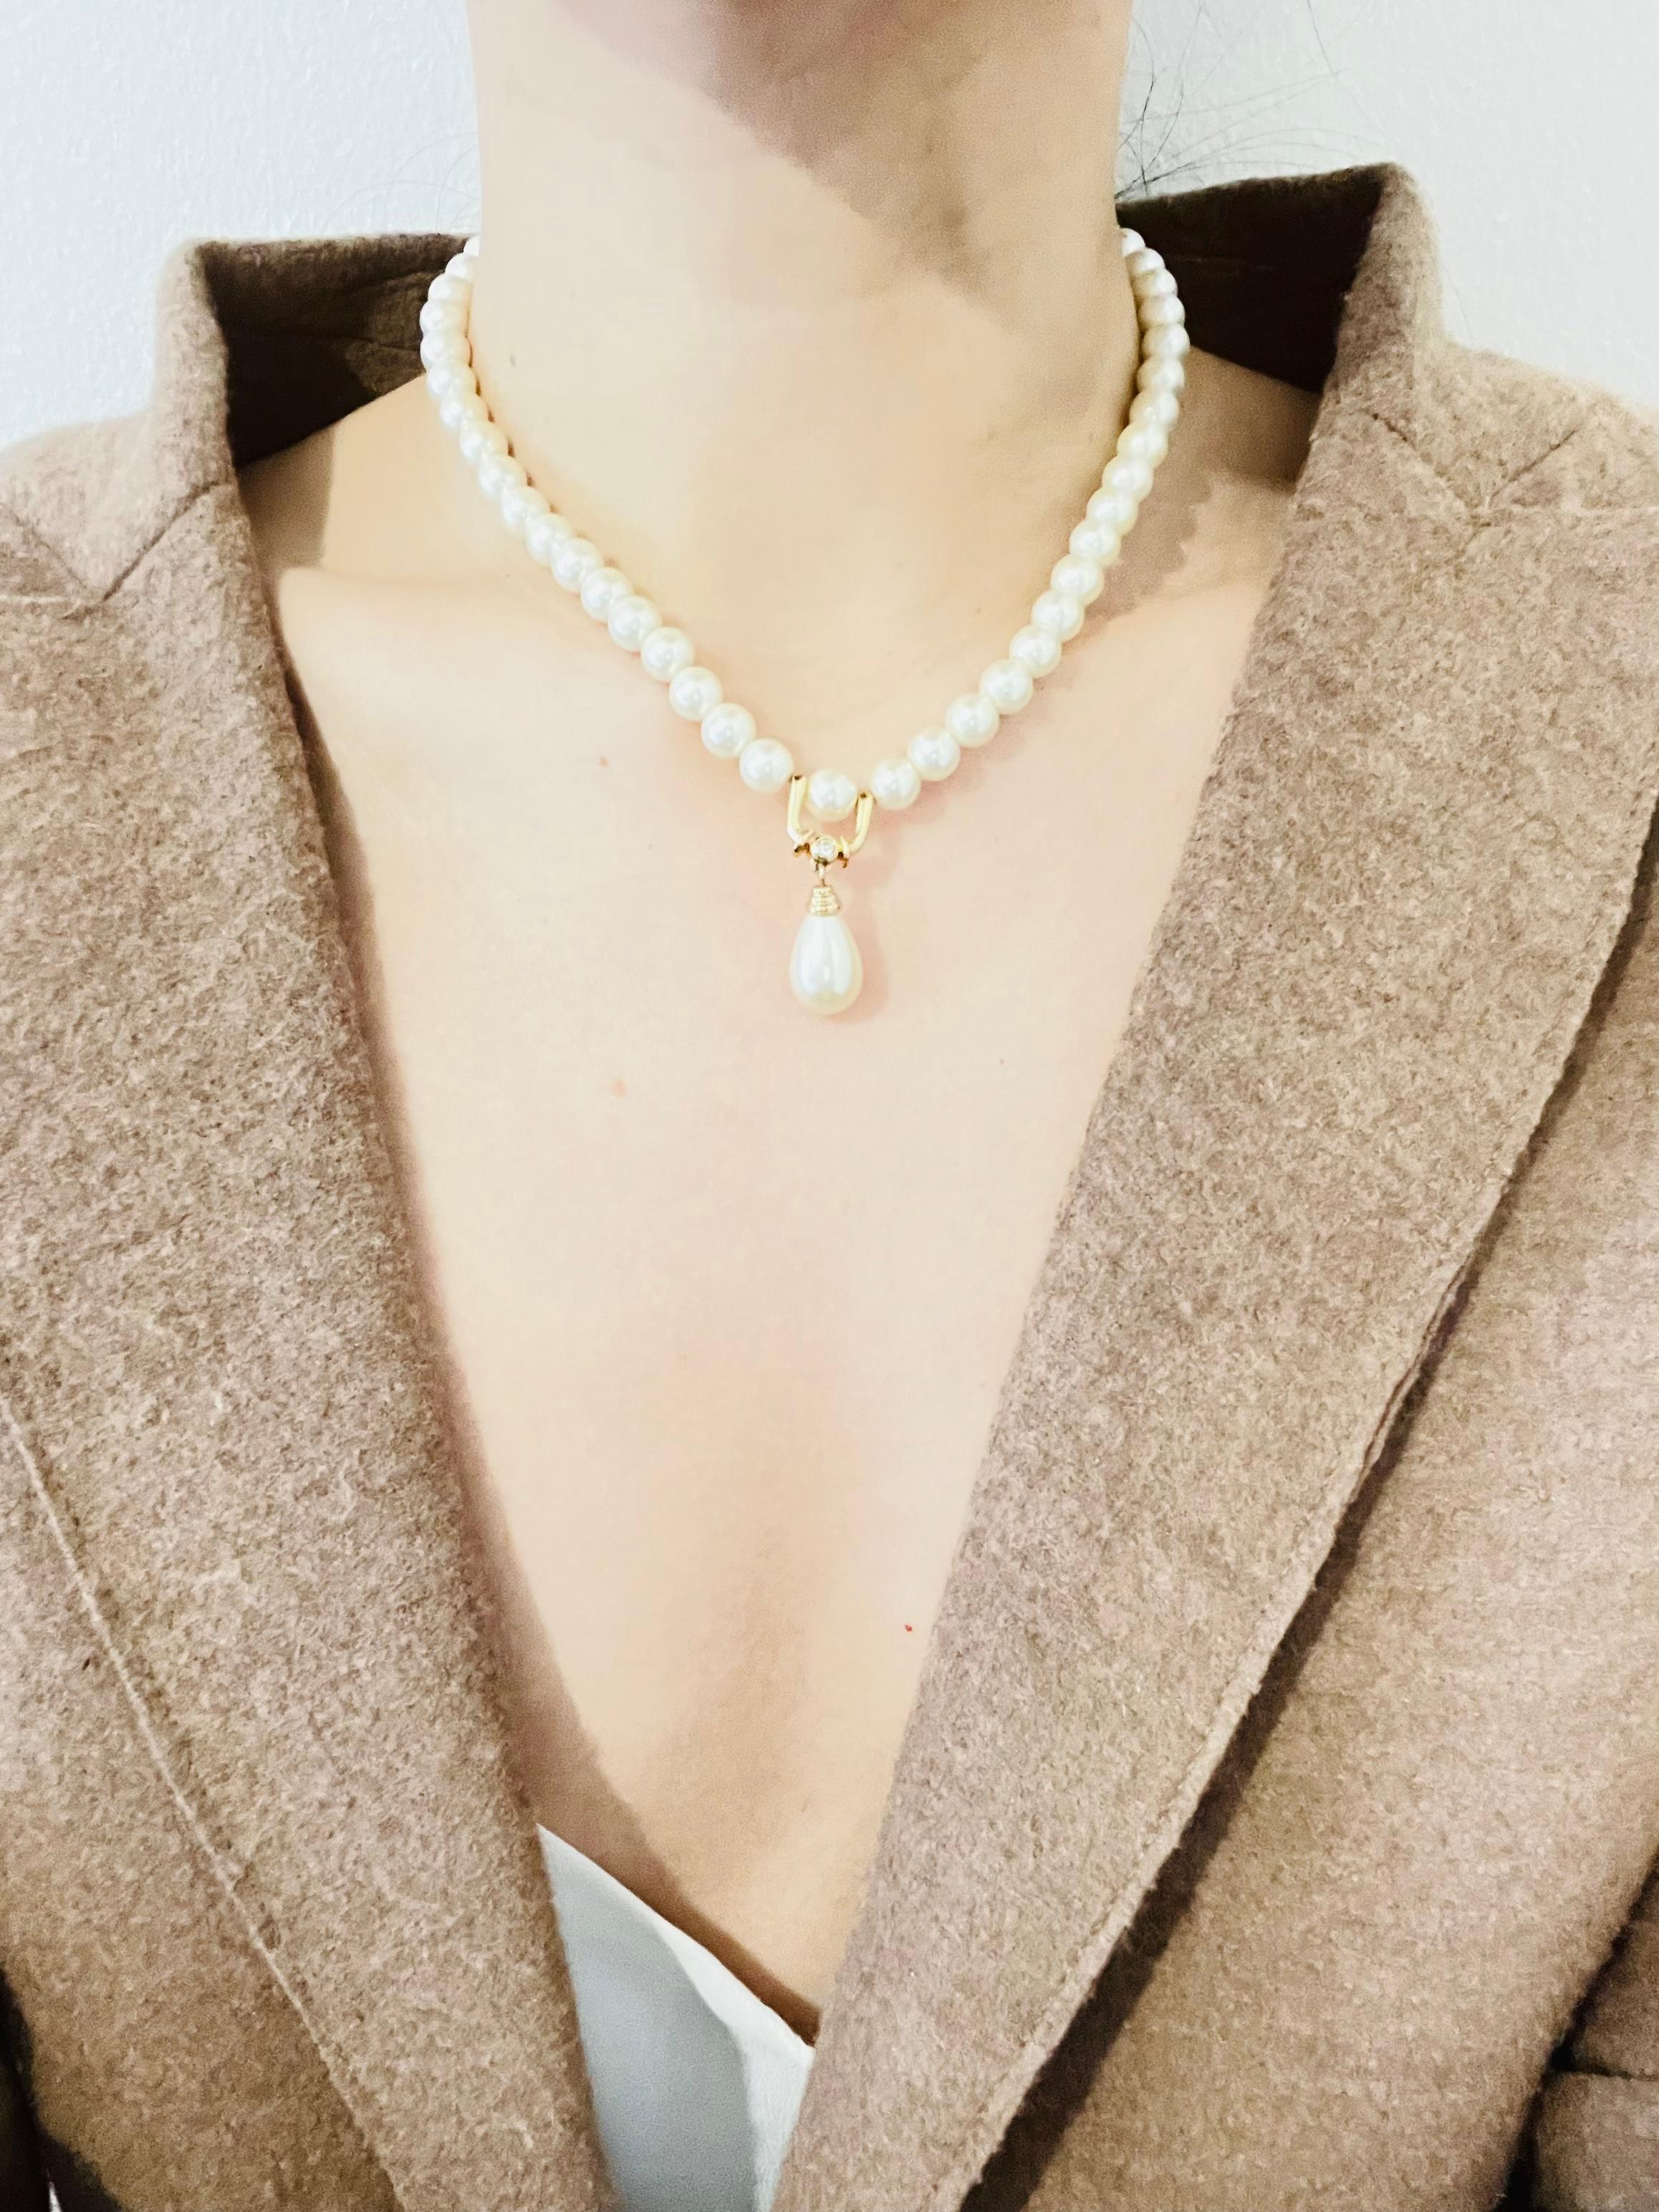 Christian Dior GROSSE 1960s White Pearls Water Drop Pendant Crystals Necklace For Sale 3